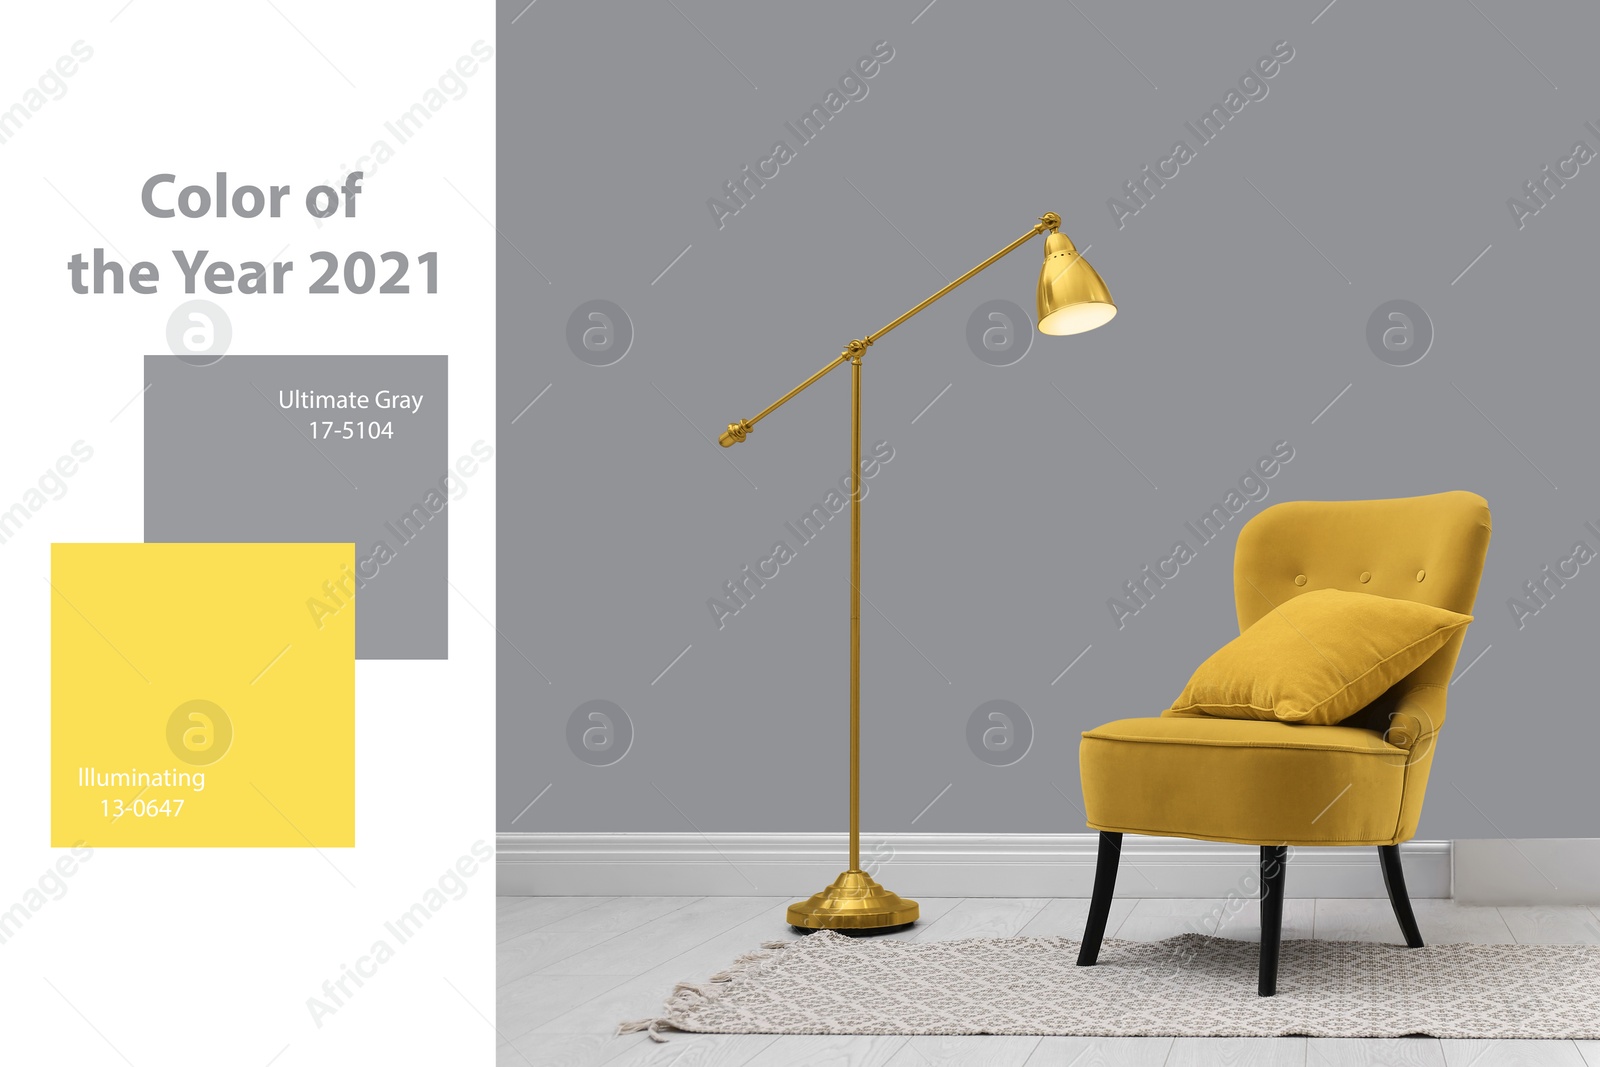 Image of Color of the year 2021. Stylish yellow armchair with cushion, rug and lamp indoors